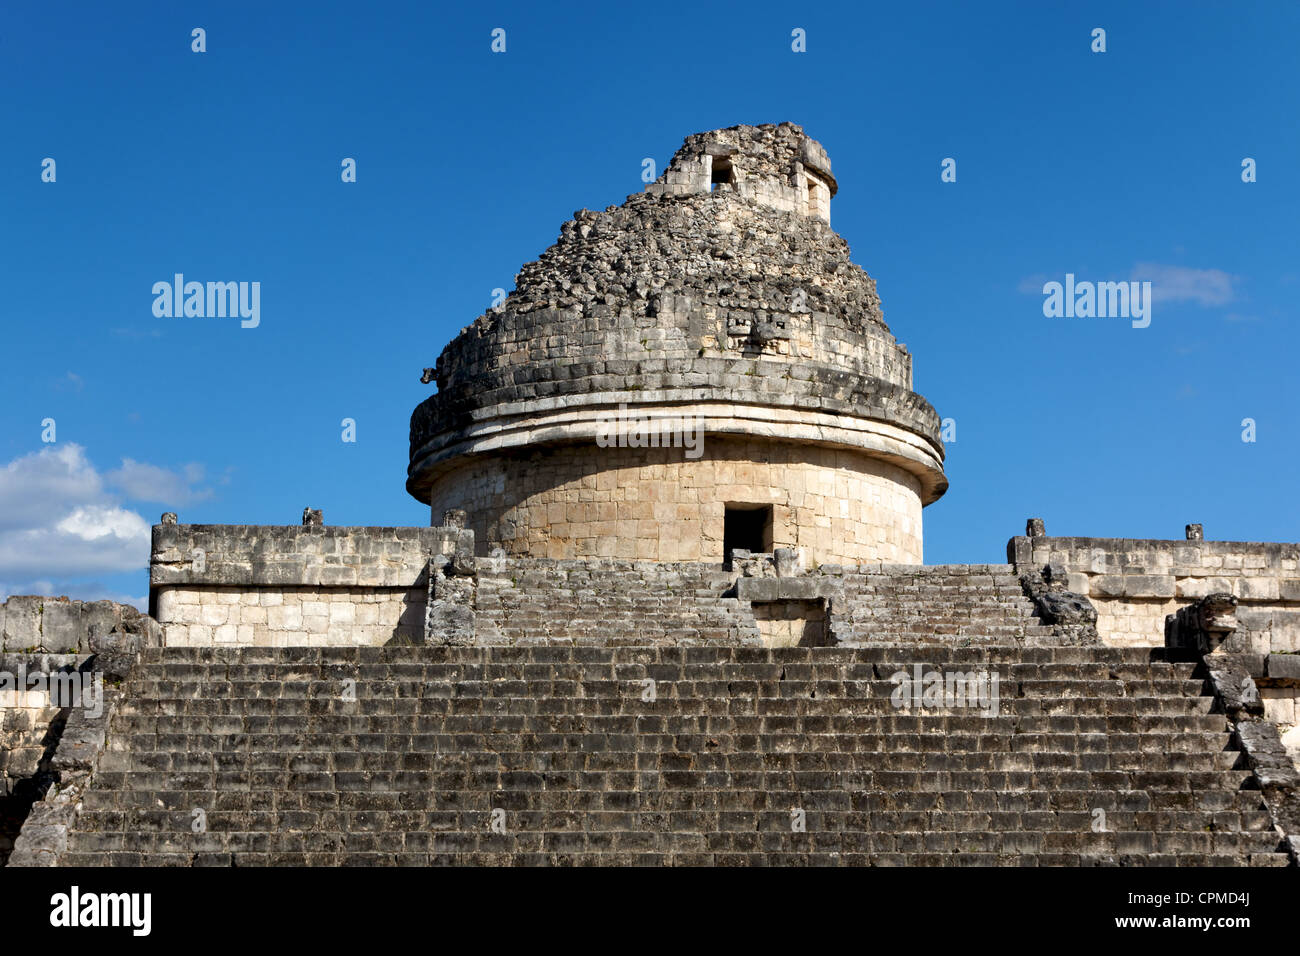 Stairs lead up to the Mayan observatory tower 'El Caracol' (the snail) at Chichen Itza, Yucatan, Mexico. Stock Photo